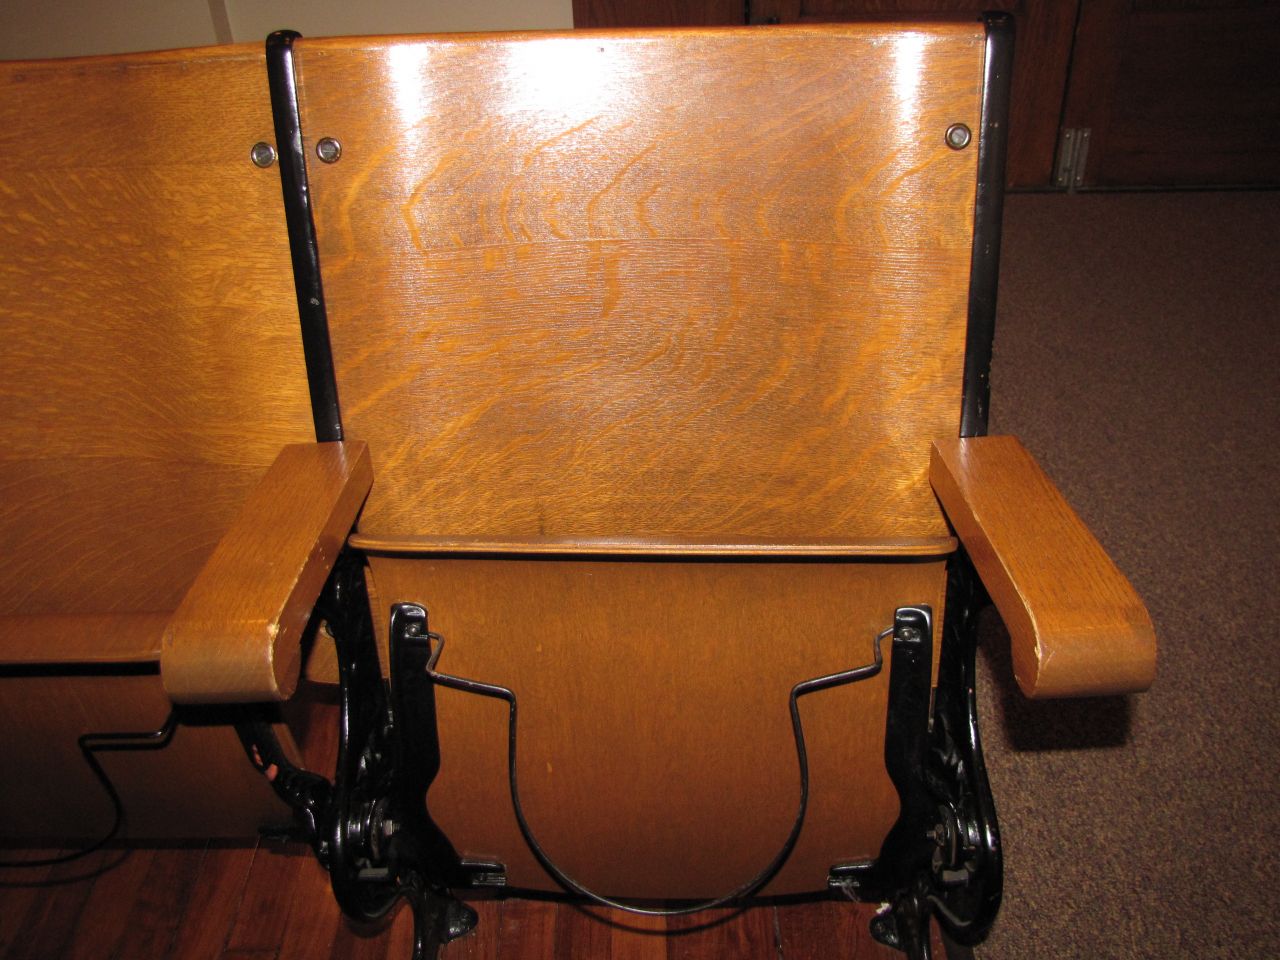 Close-up of seats with antique hat holder underneath